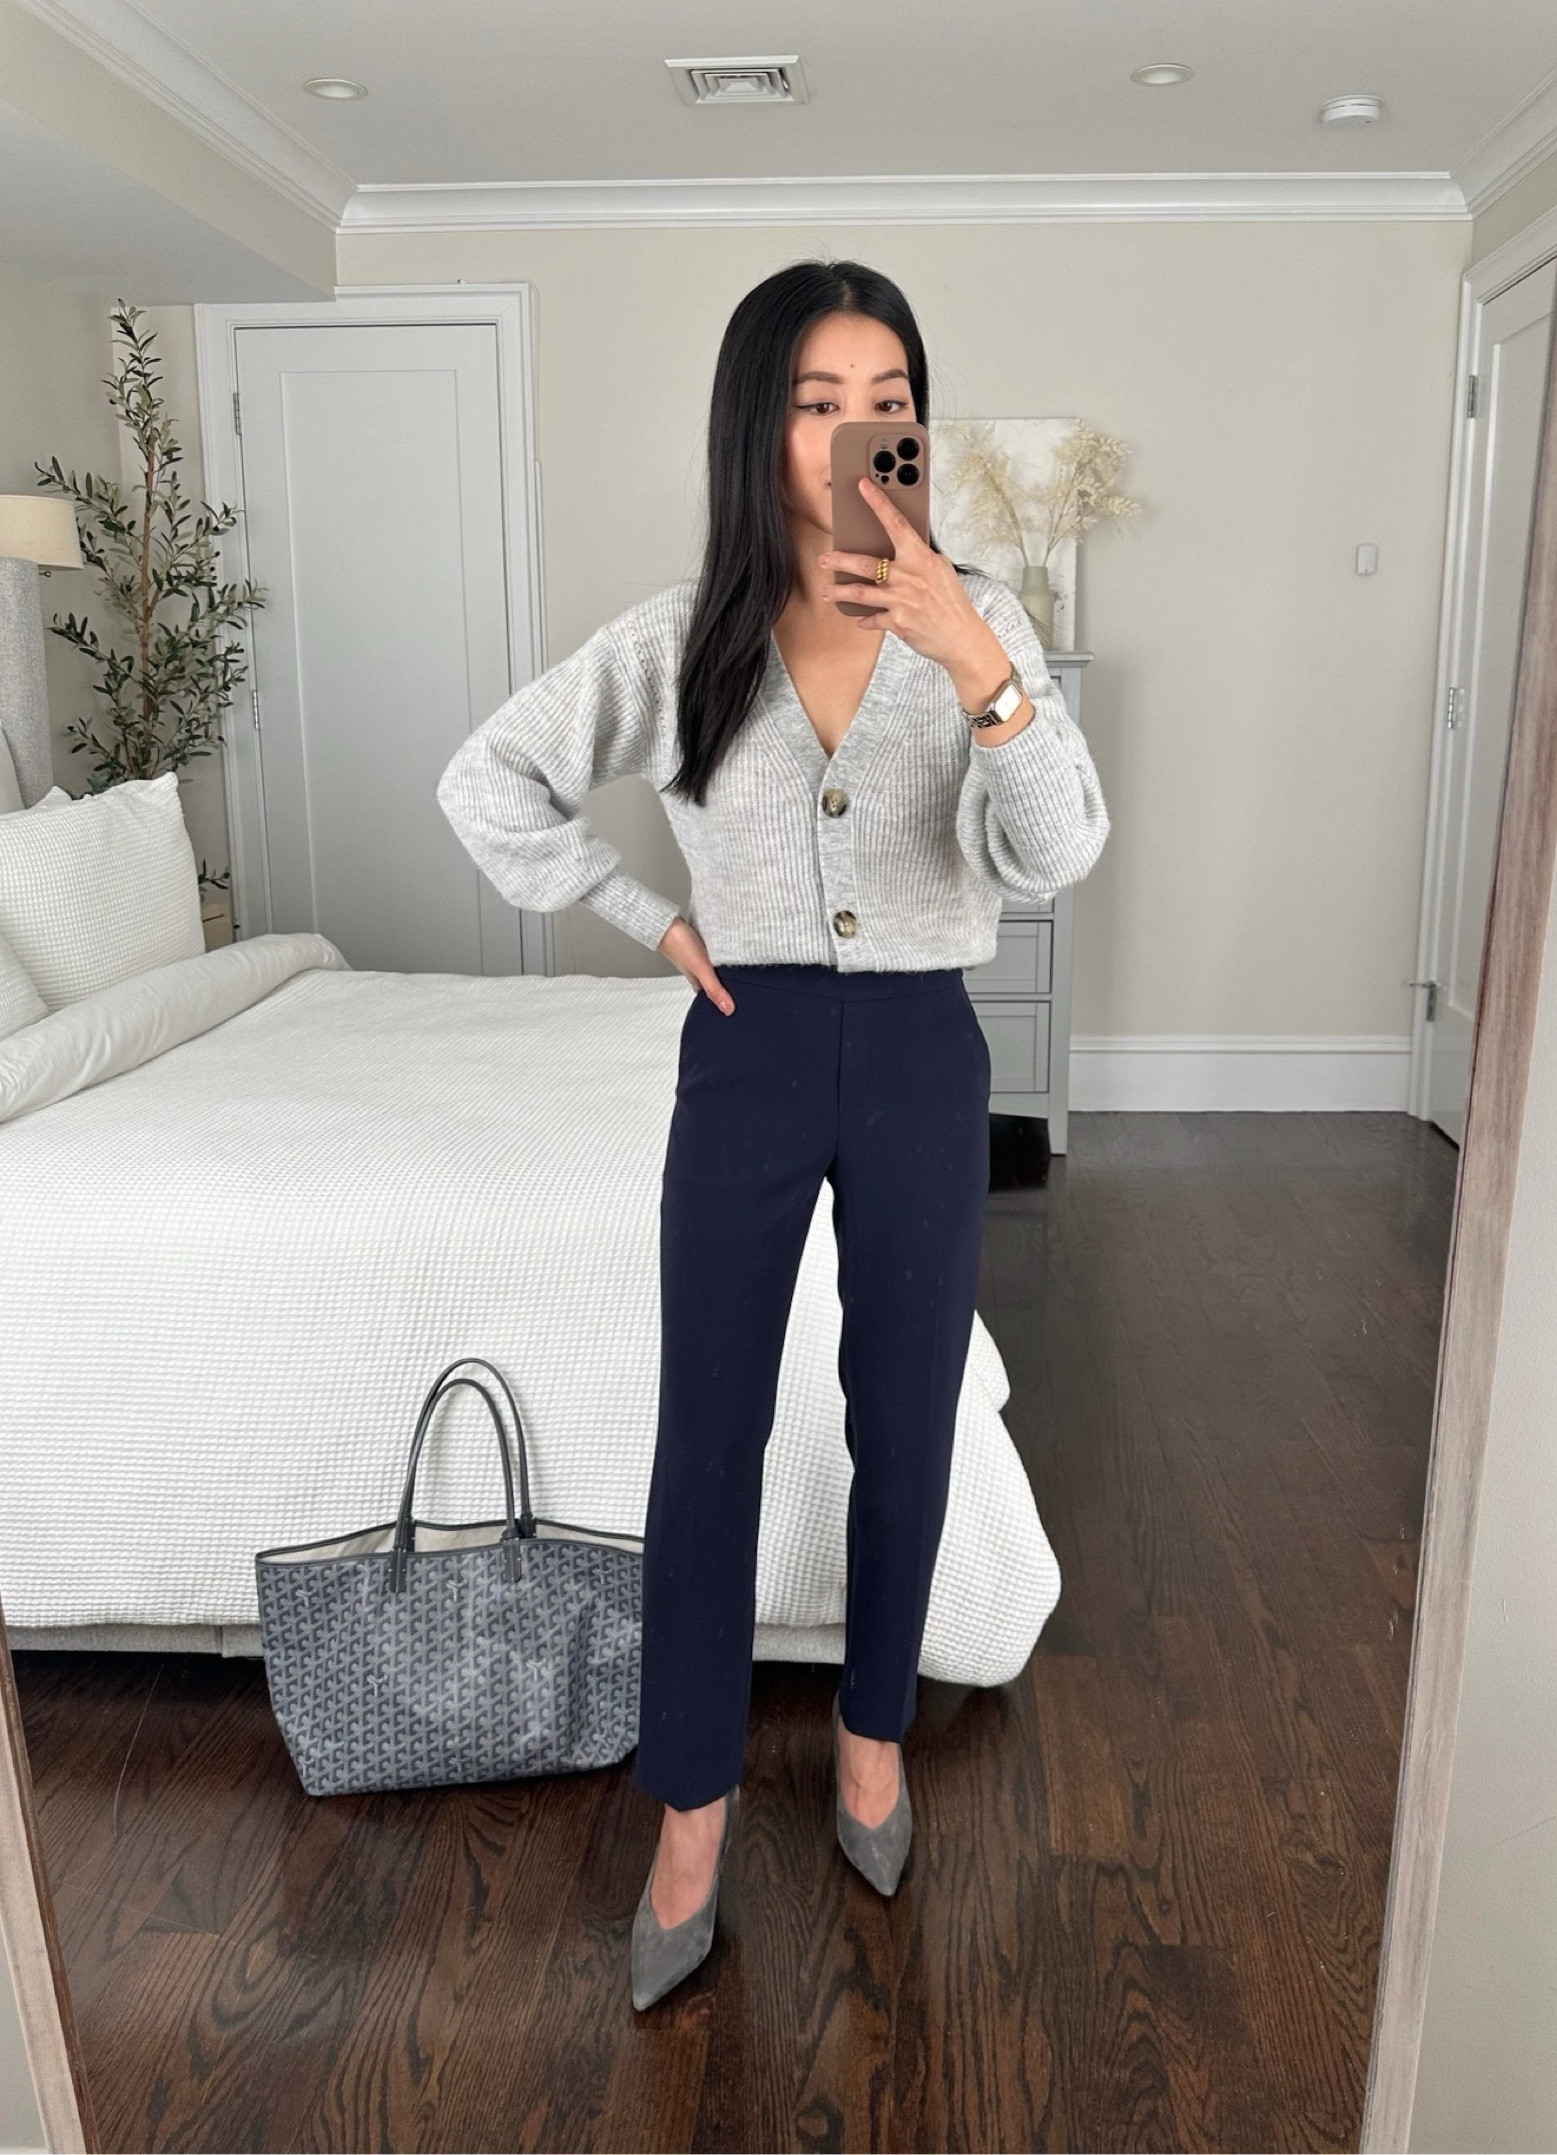 Petite Suki Trouser Suit Outfit curated on LTK